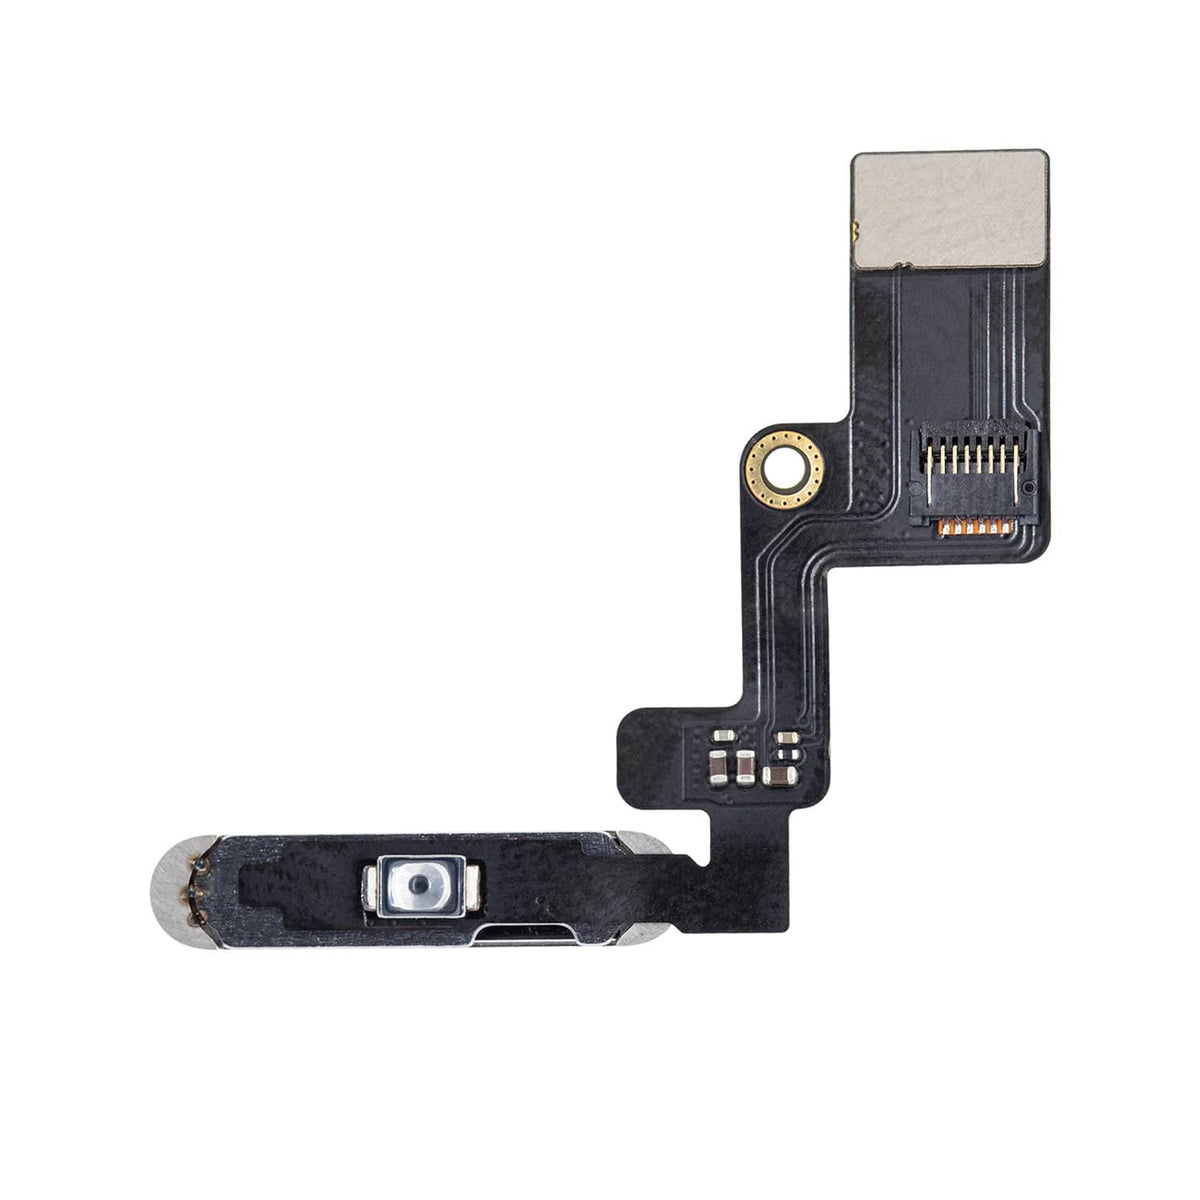 SPACE GRAY POWER BUTTON WITH FLEX CABLE FOR IPAD AIR 4/5